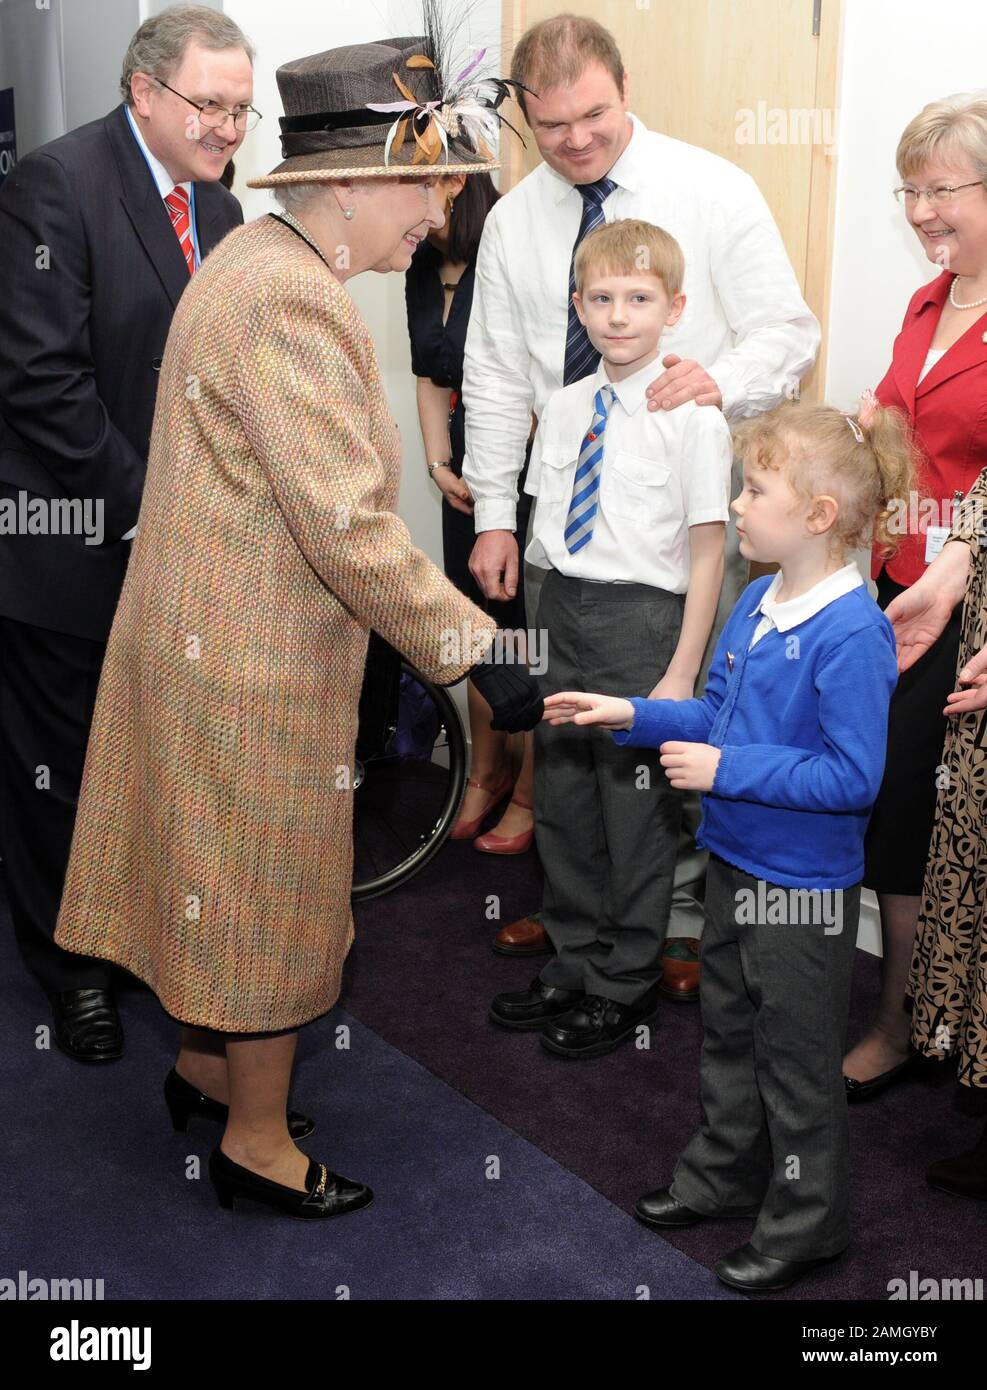 9 year old George Taylor official club campaigner for the British legion  meeting  the H.M. The Queen at the opening of the new British legion in 2009. Stock Photo